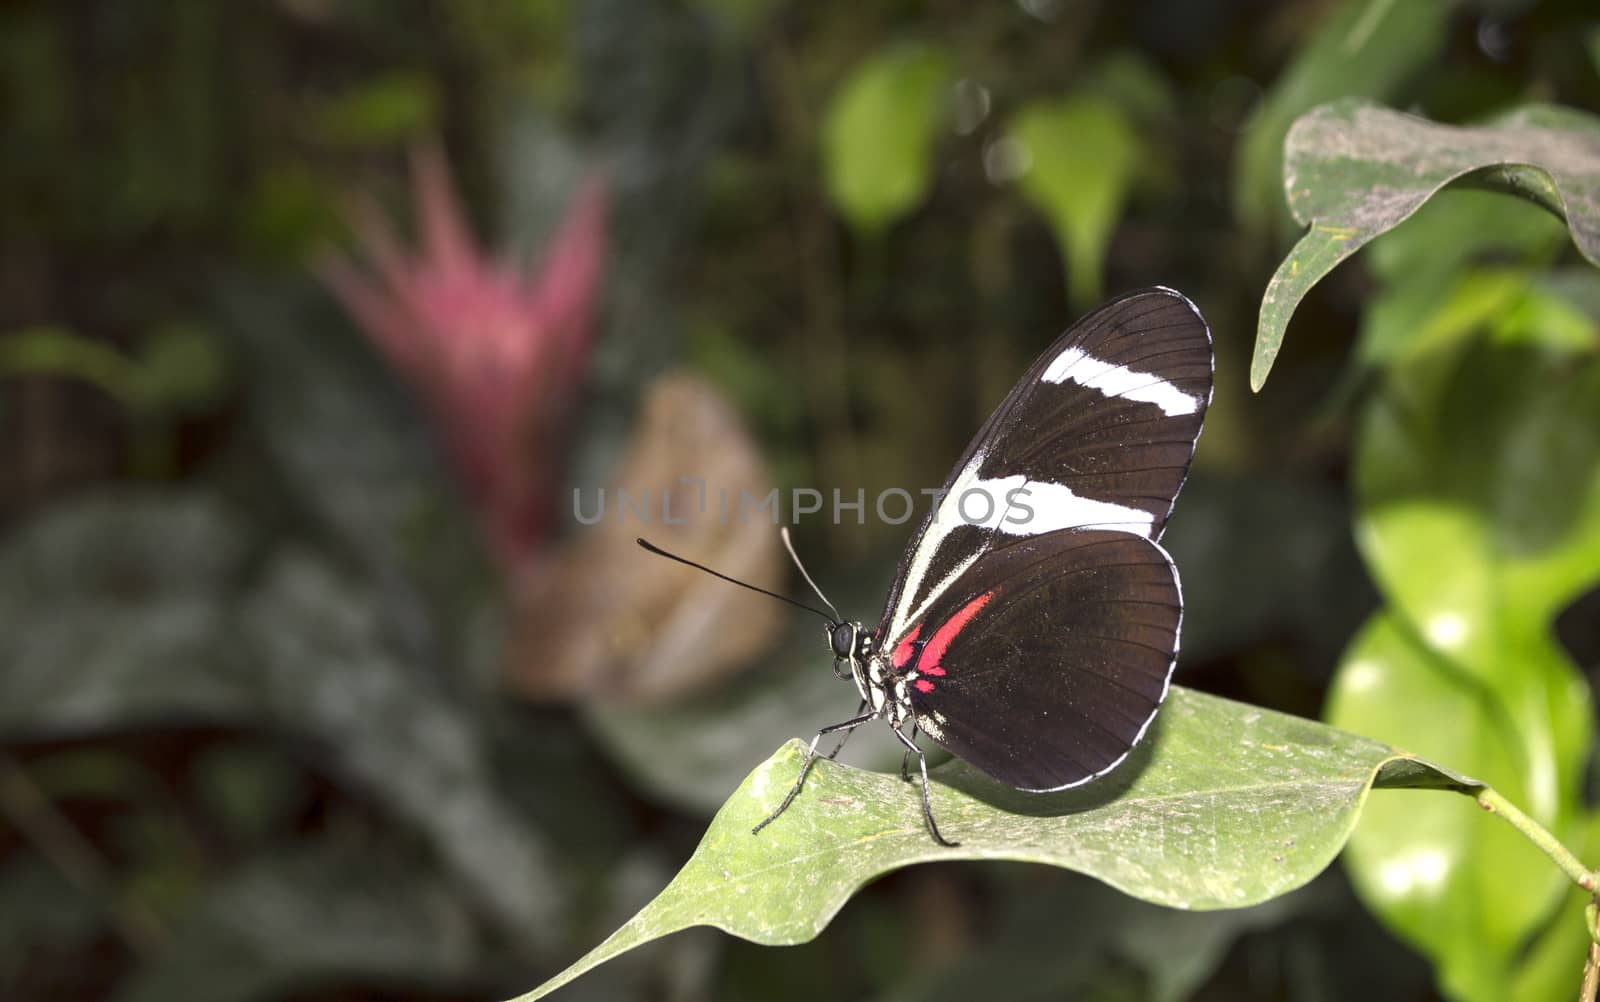 Doris Longwing butterfly Heliconius doris by compuinfoto